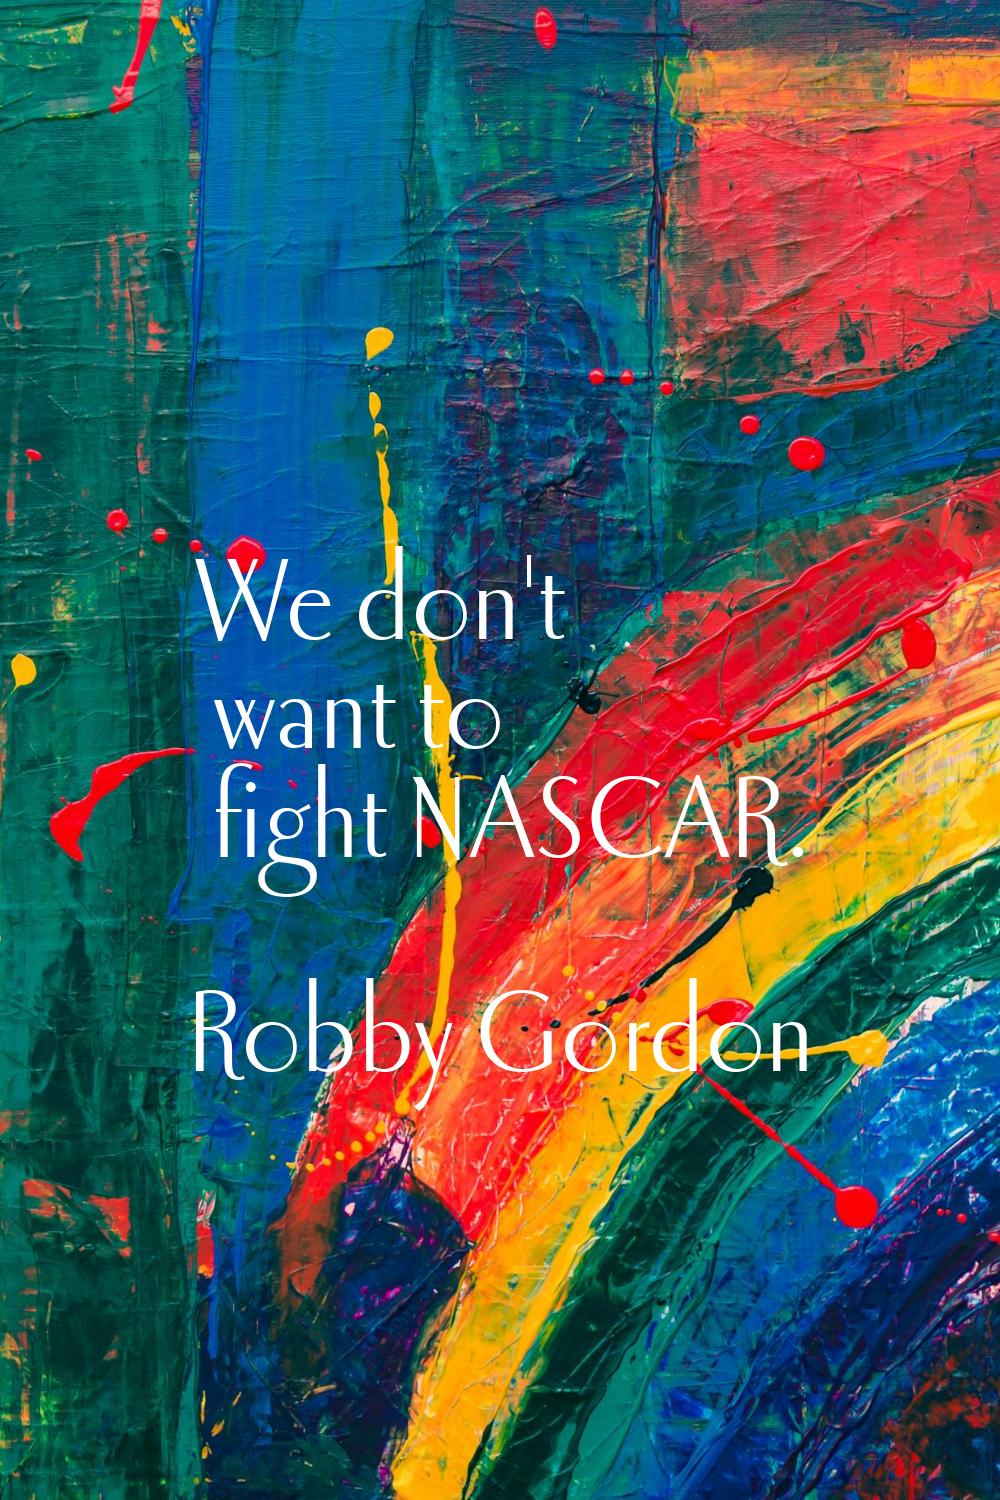 We don't want to fight NASCAR.